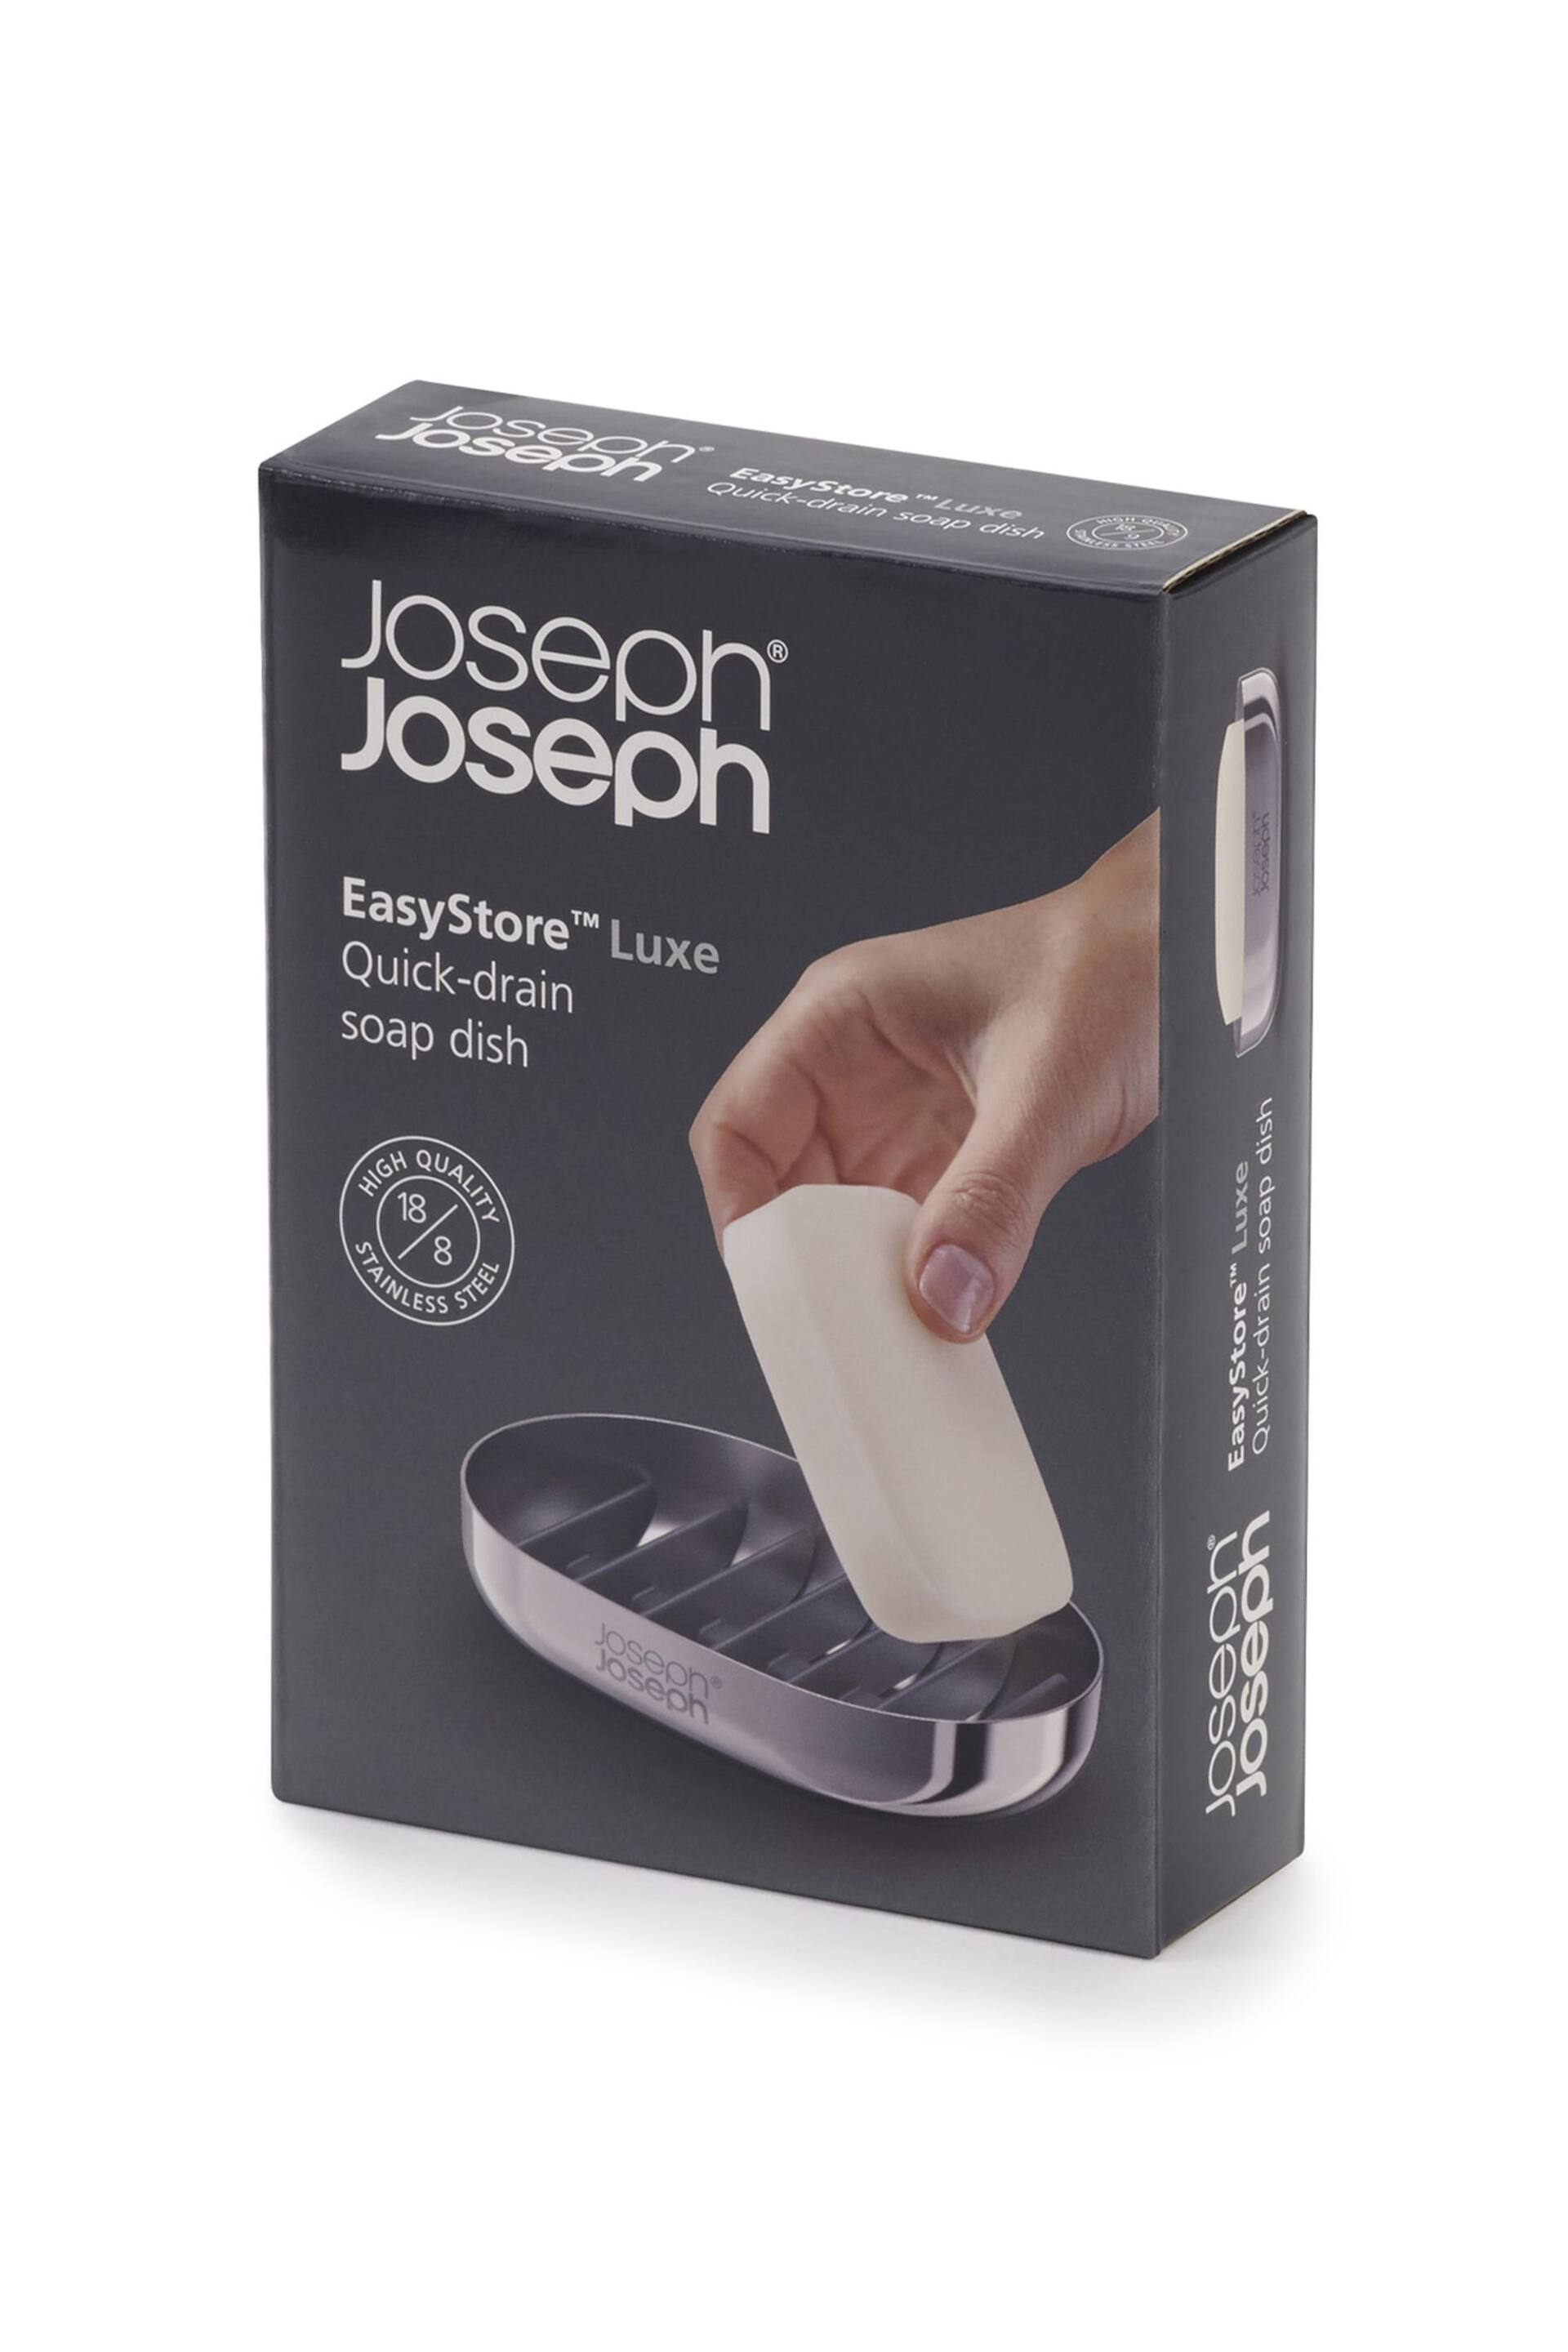 Joseph Joseph EasyStore Luxe Stainless Steel Soap Dish - Image 6 of 6